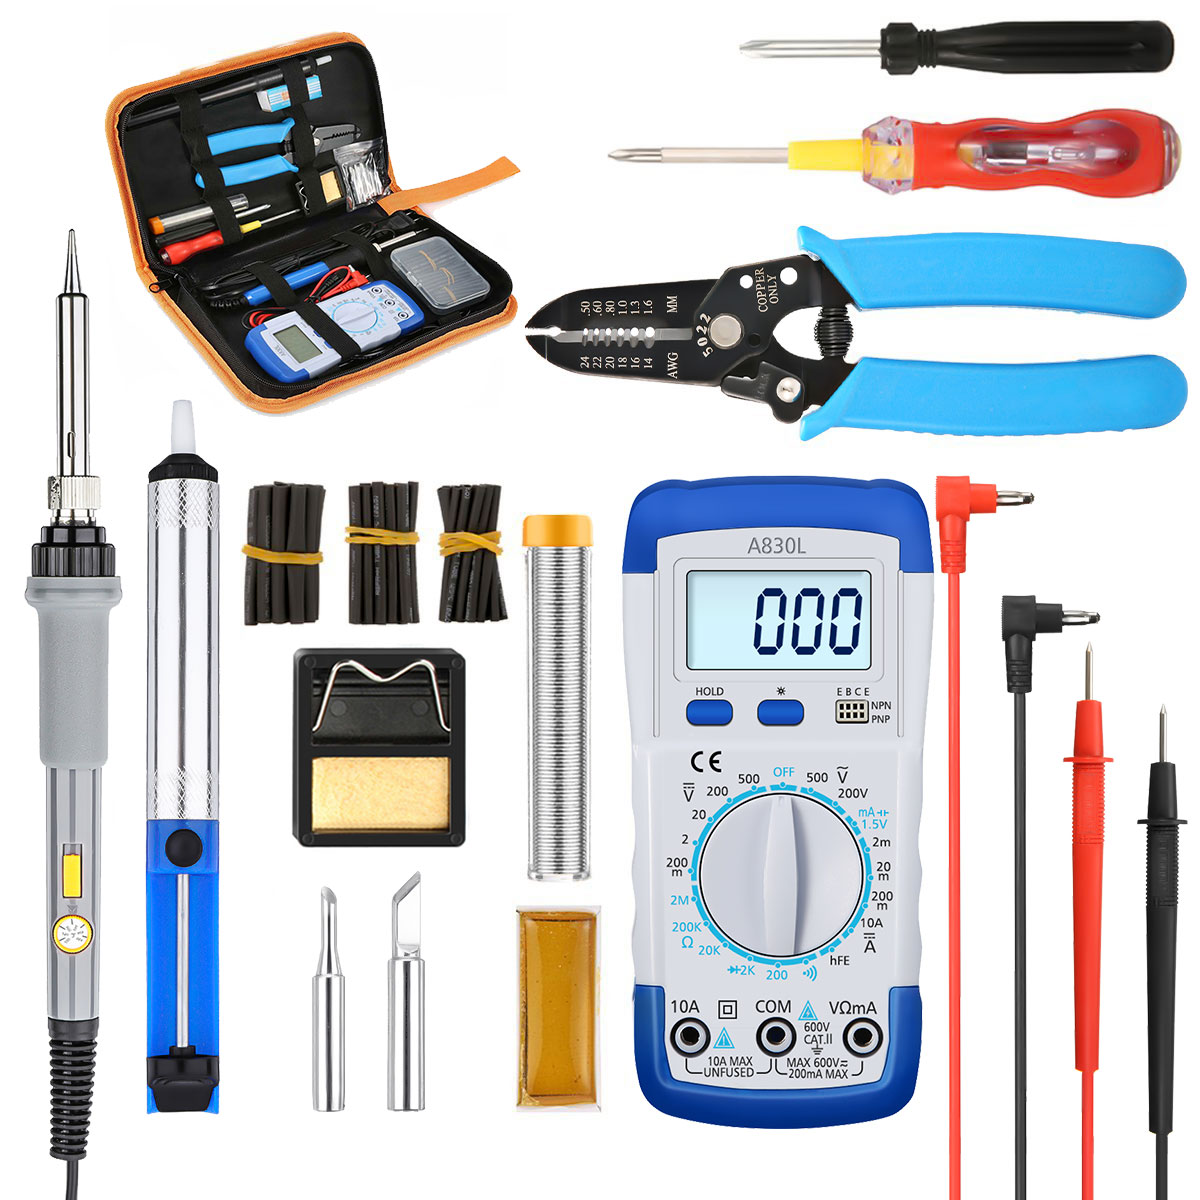 60W-Soldering-Iron-Kit-Tips-Electronic-Welding-Tool-Adjustable-Temperature-Case-1407153-1